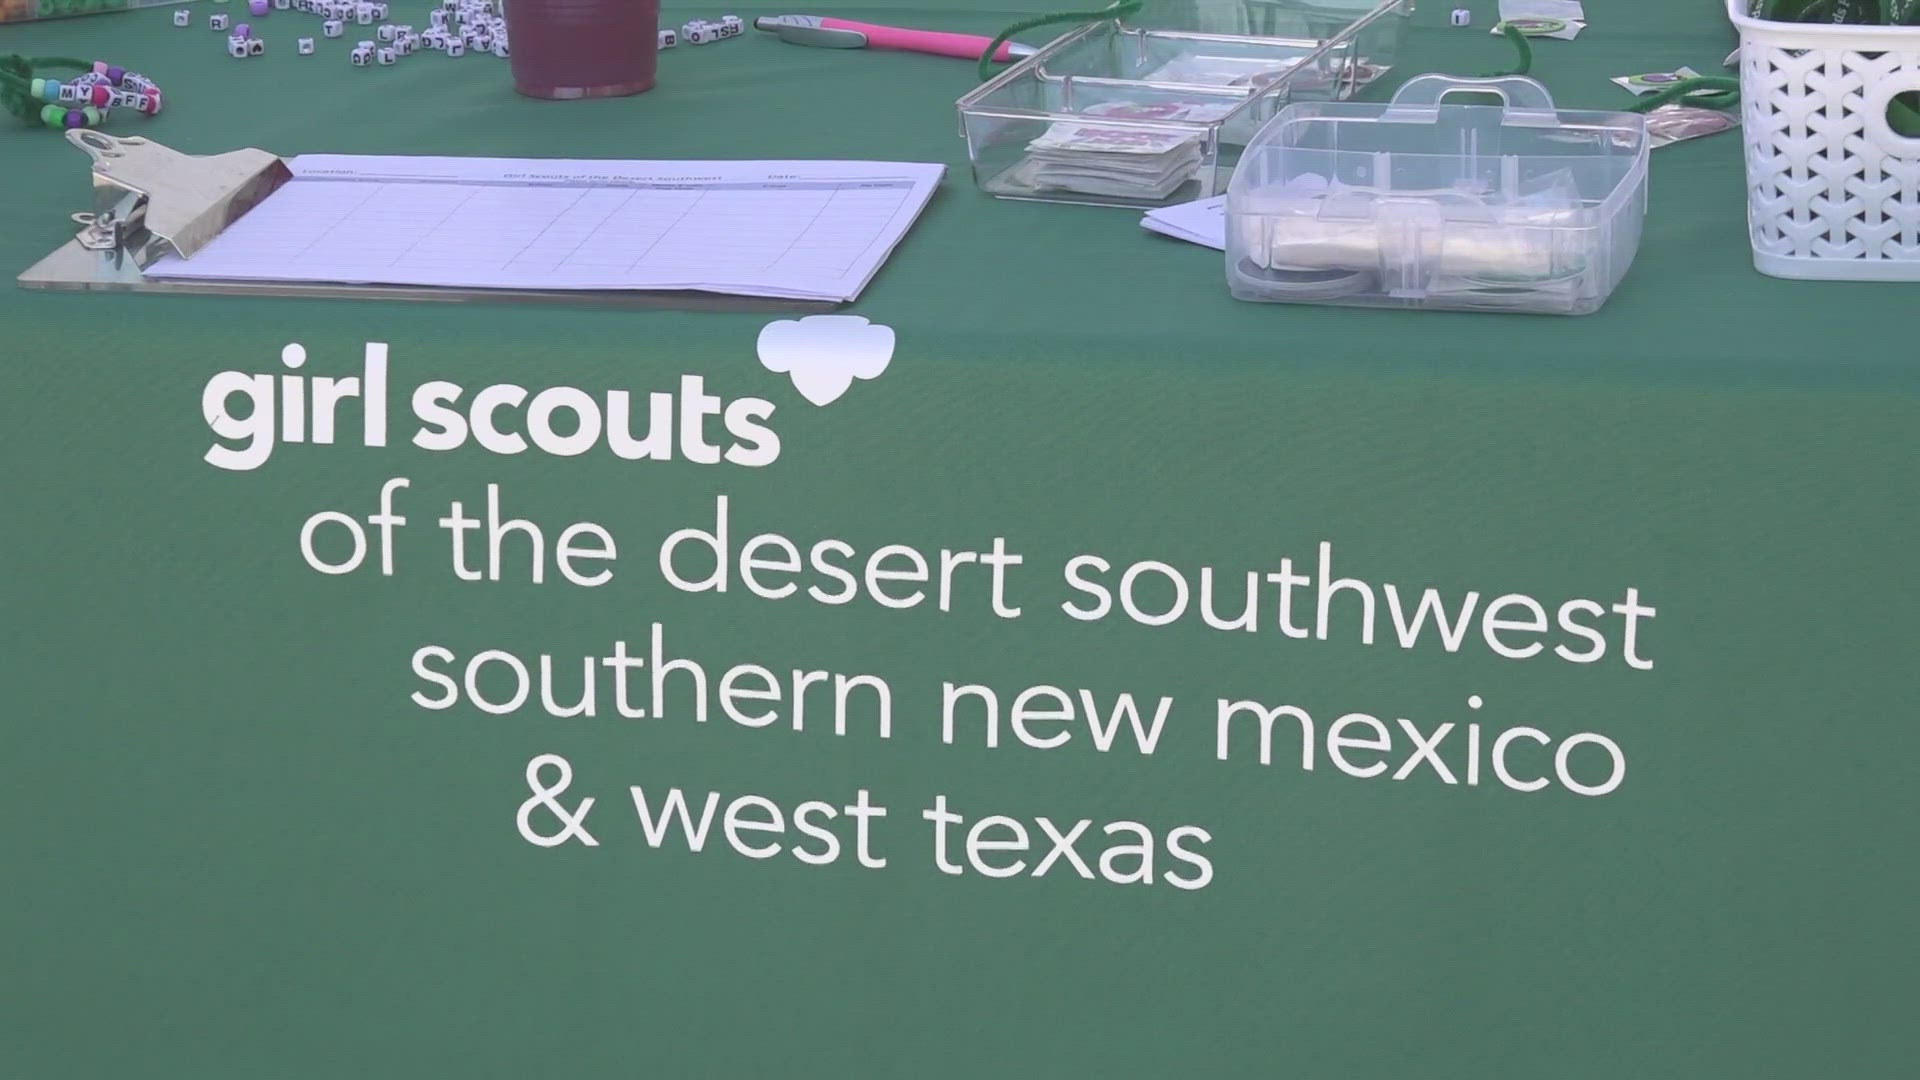 Girl Scouts of the Desert Southwest help get Girl Scout cookies to those in need.